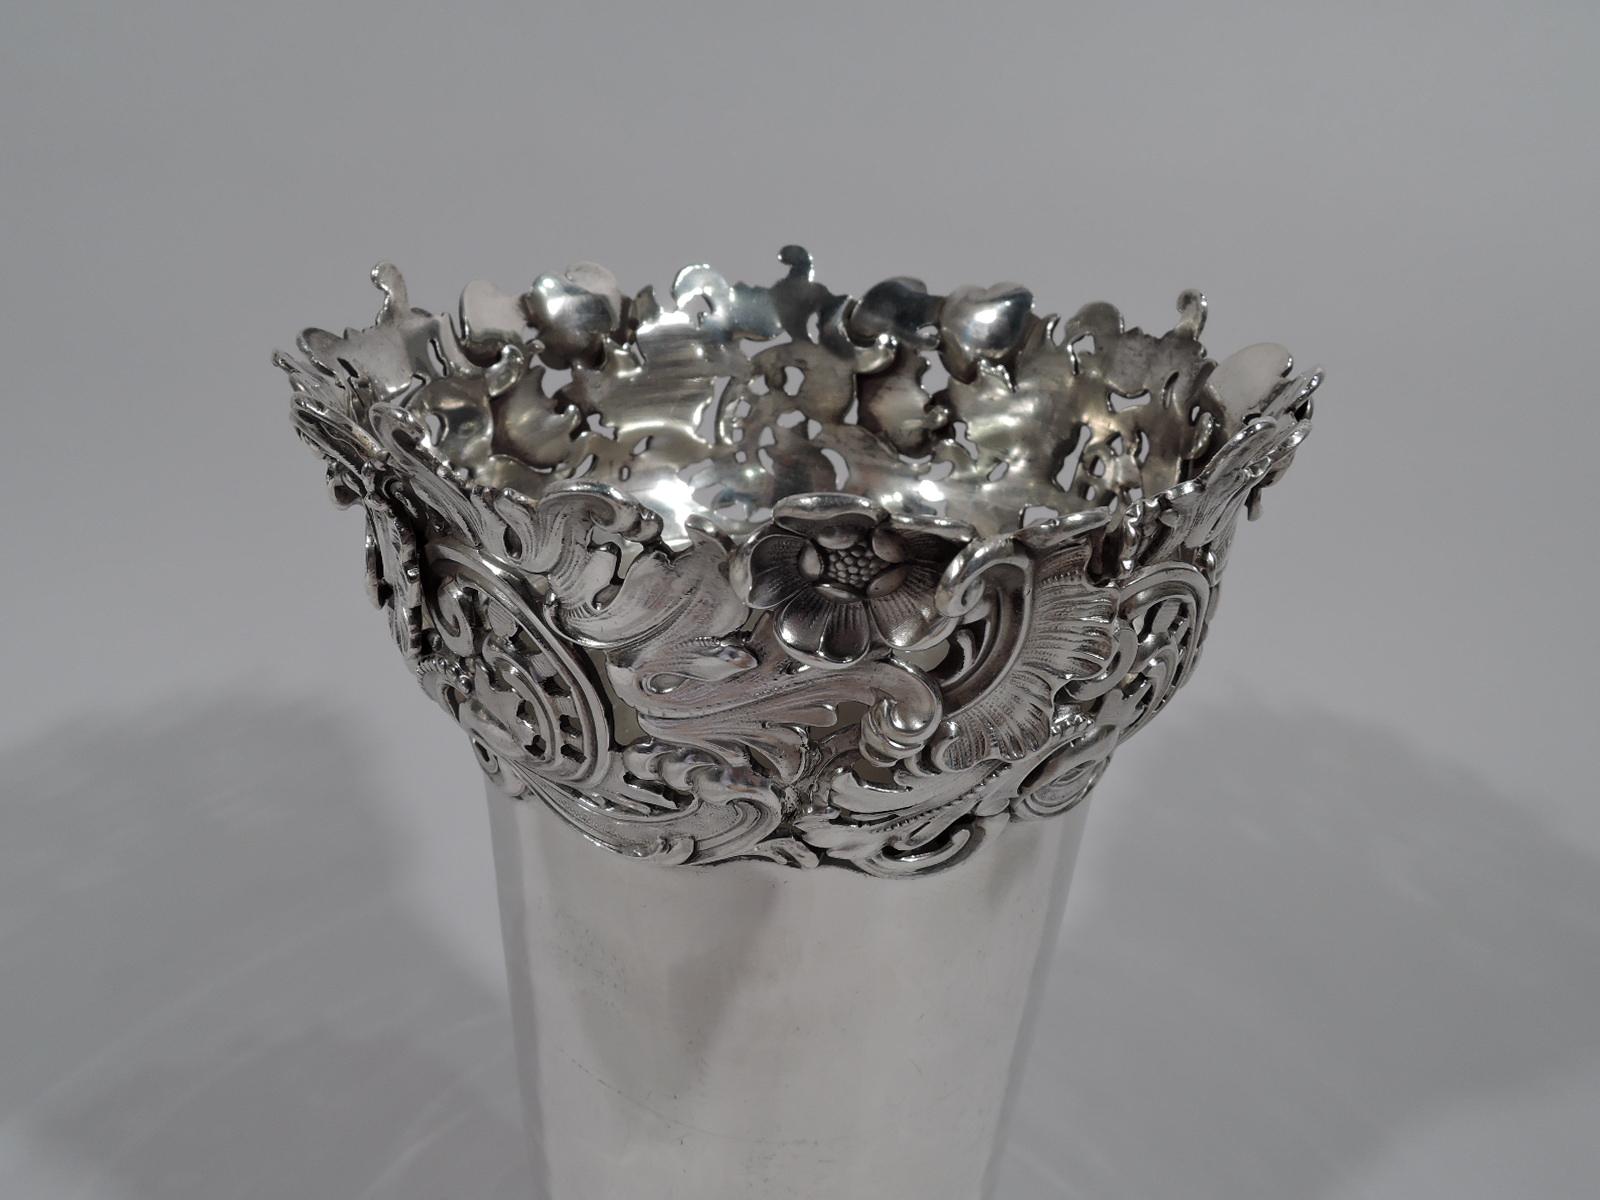 Art Nouveau sterling silver vase. Made by Redlich in New York, circa 1900. Plain cylinder with substantial leafy-scroll and flower mounts applied to base and rim. An unusual contrasting design. Fully marked and numbered 1682. Weight: 17 troy ounces.